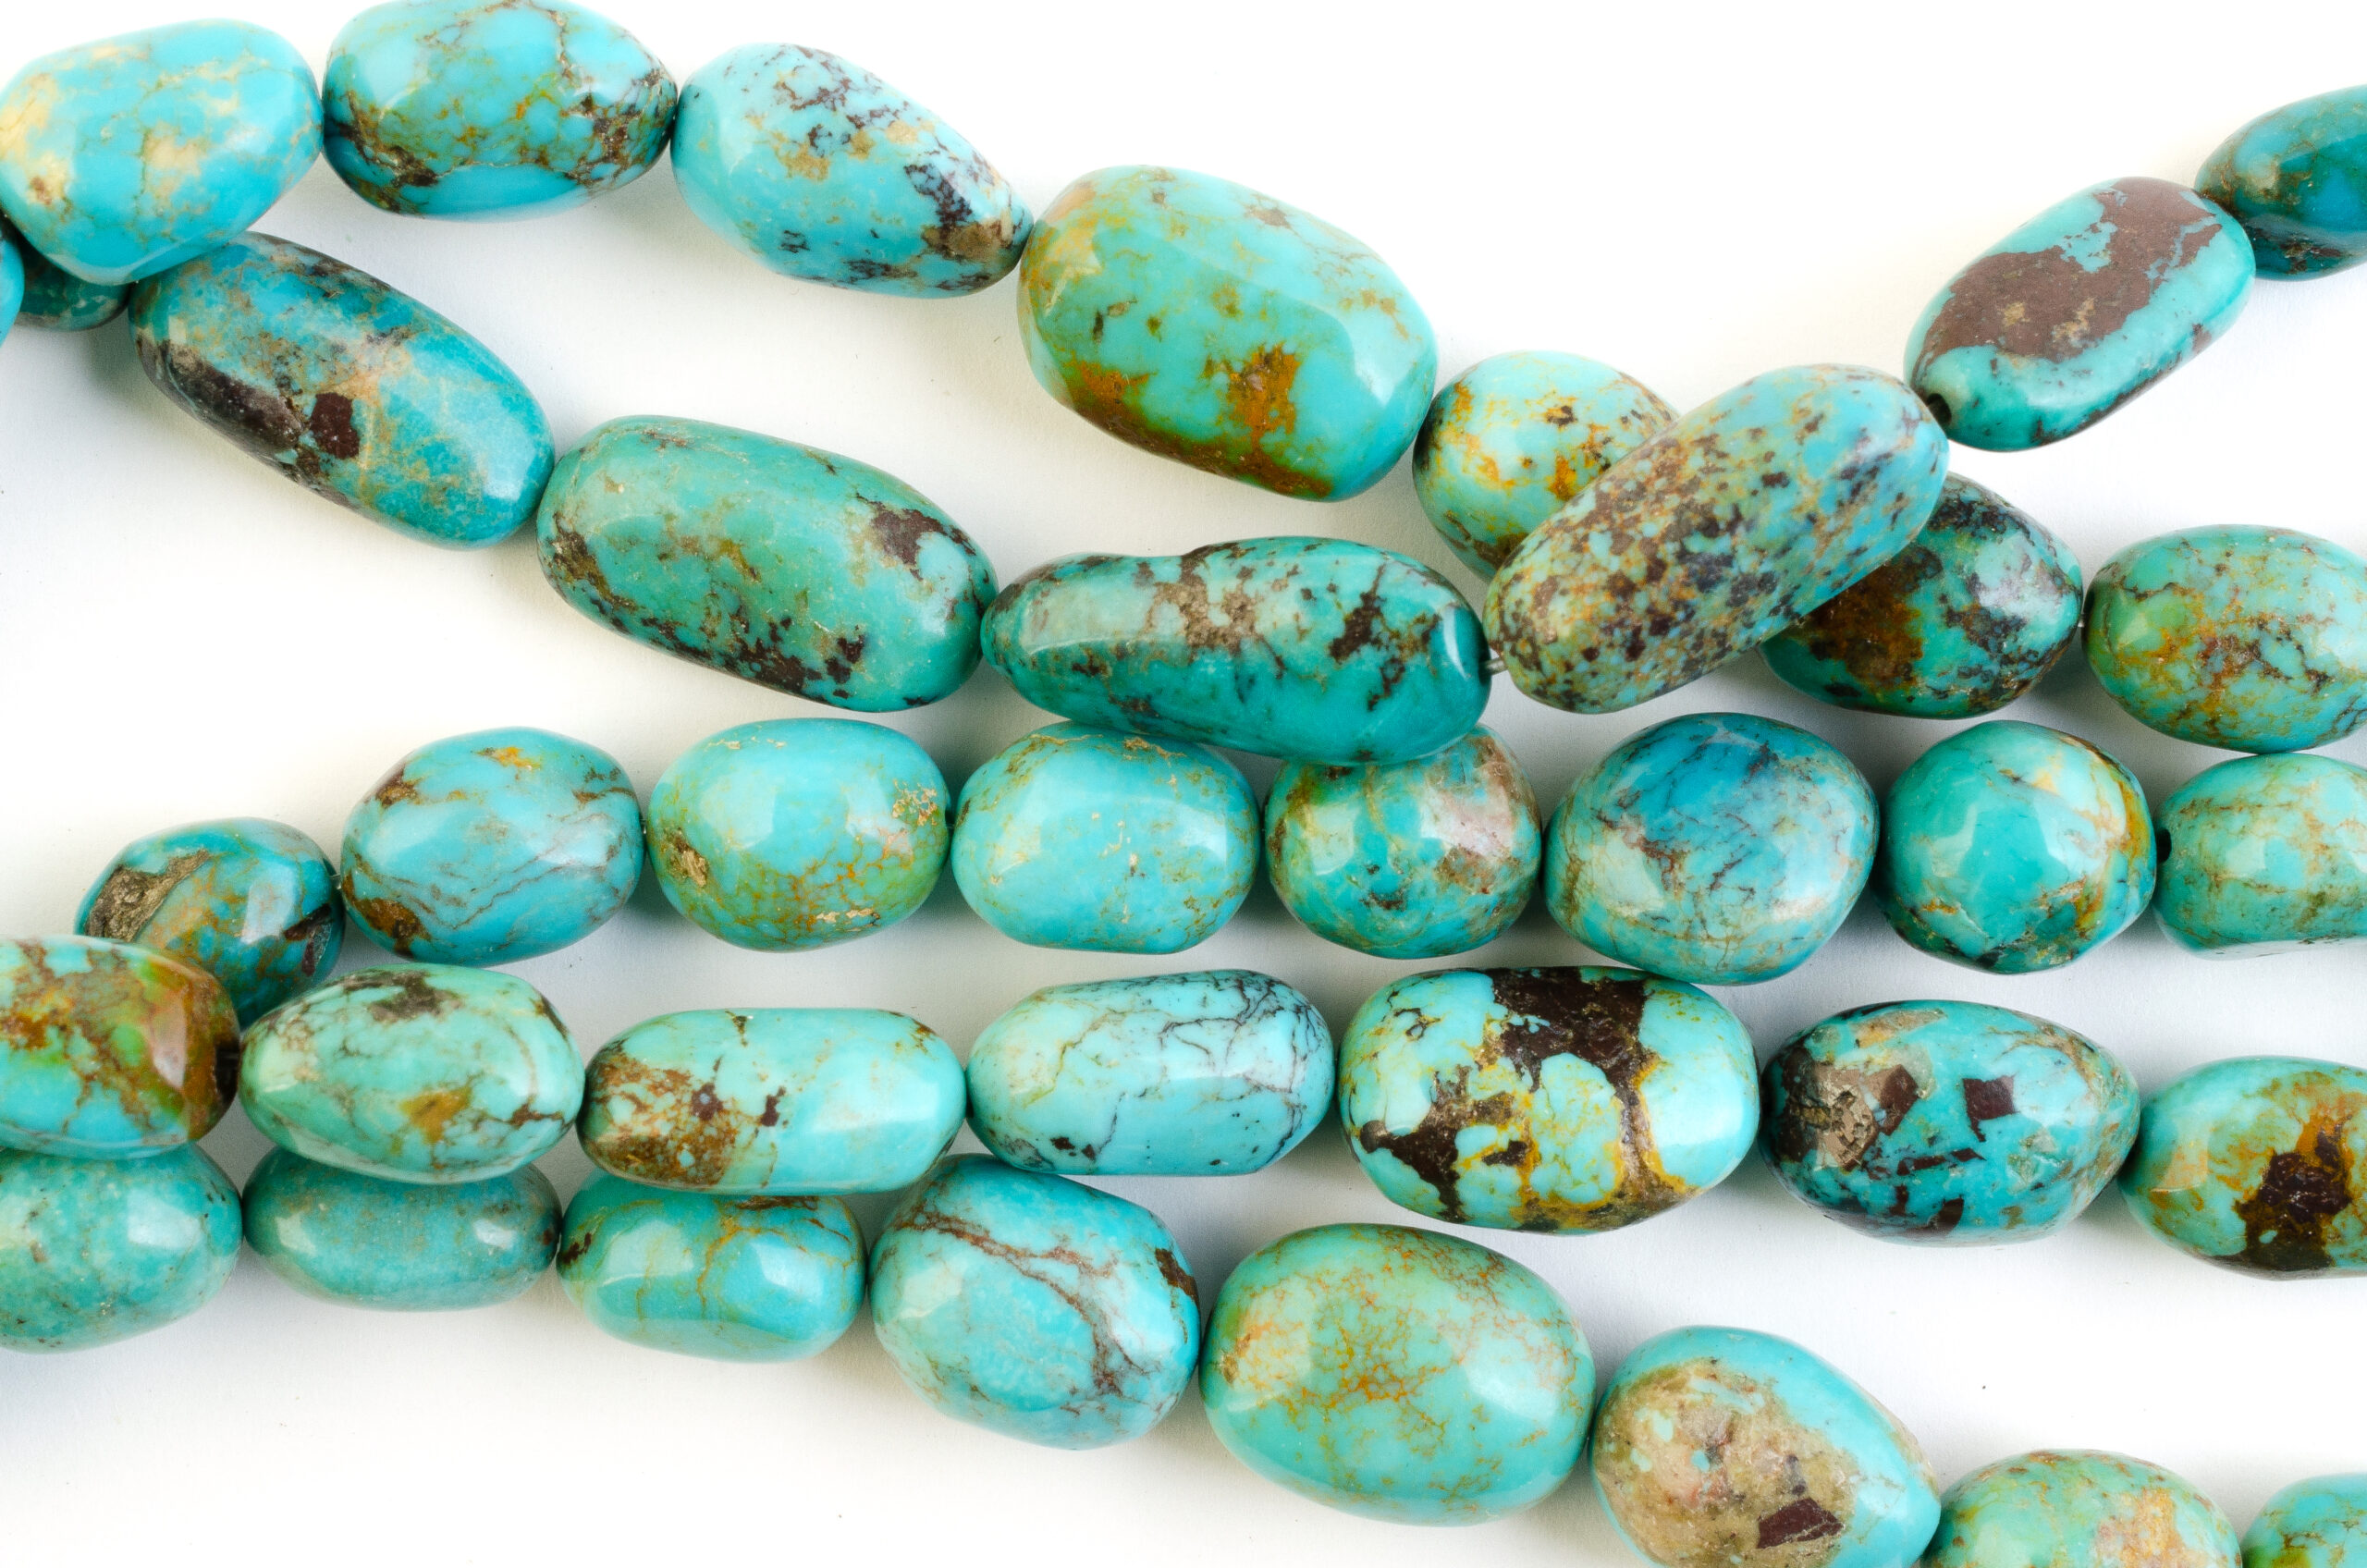 Natural Turquoise 12x10mm Oval Bead 8 Strand, 16 Beads